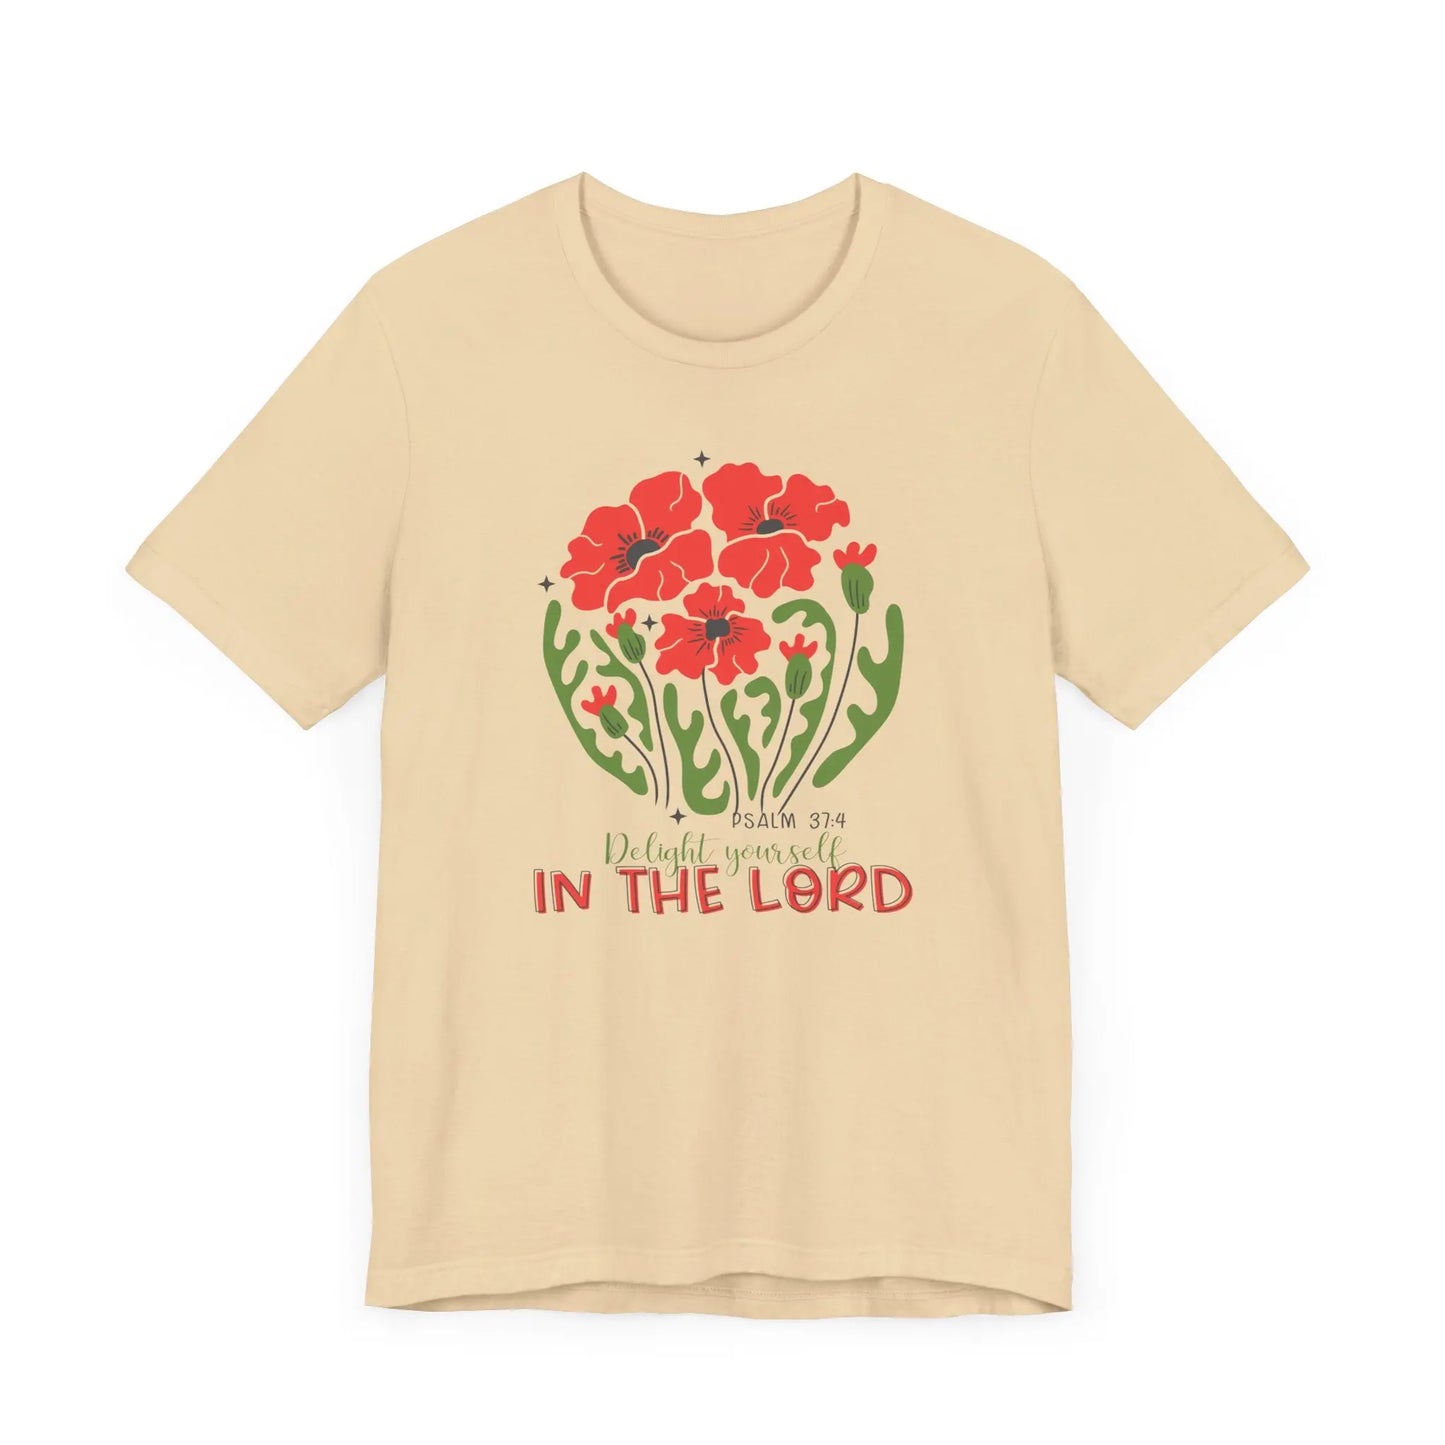 Delight Yourself in the Lord Christian Shirt Printify